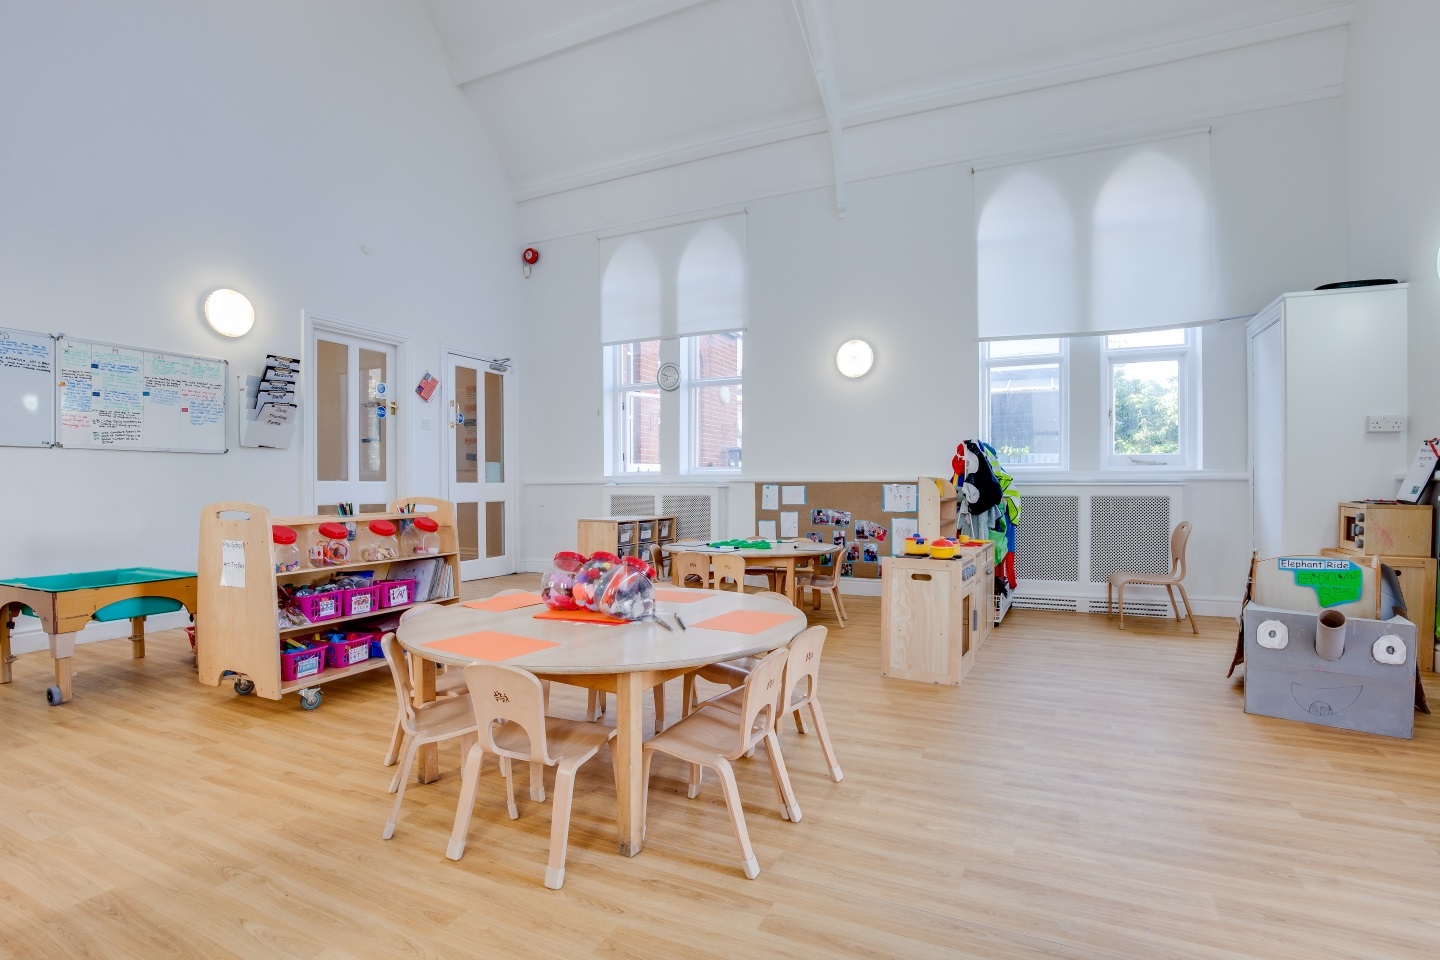 Images CLOSED Bright Horizons Esher Day Nursery and Preschool